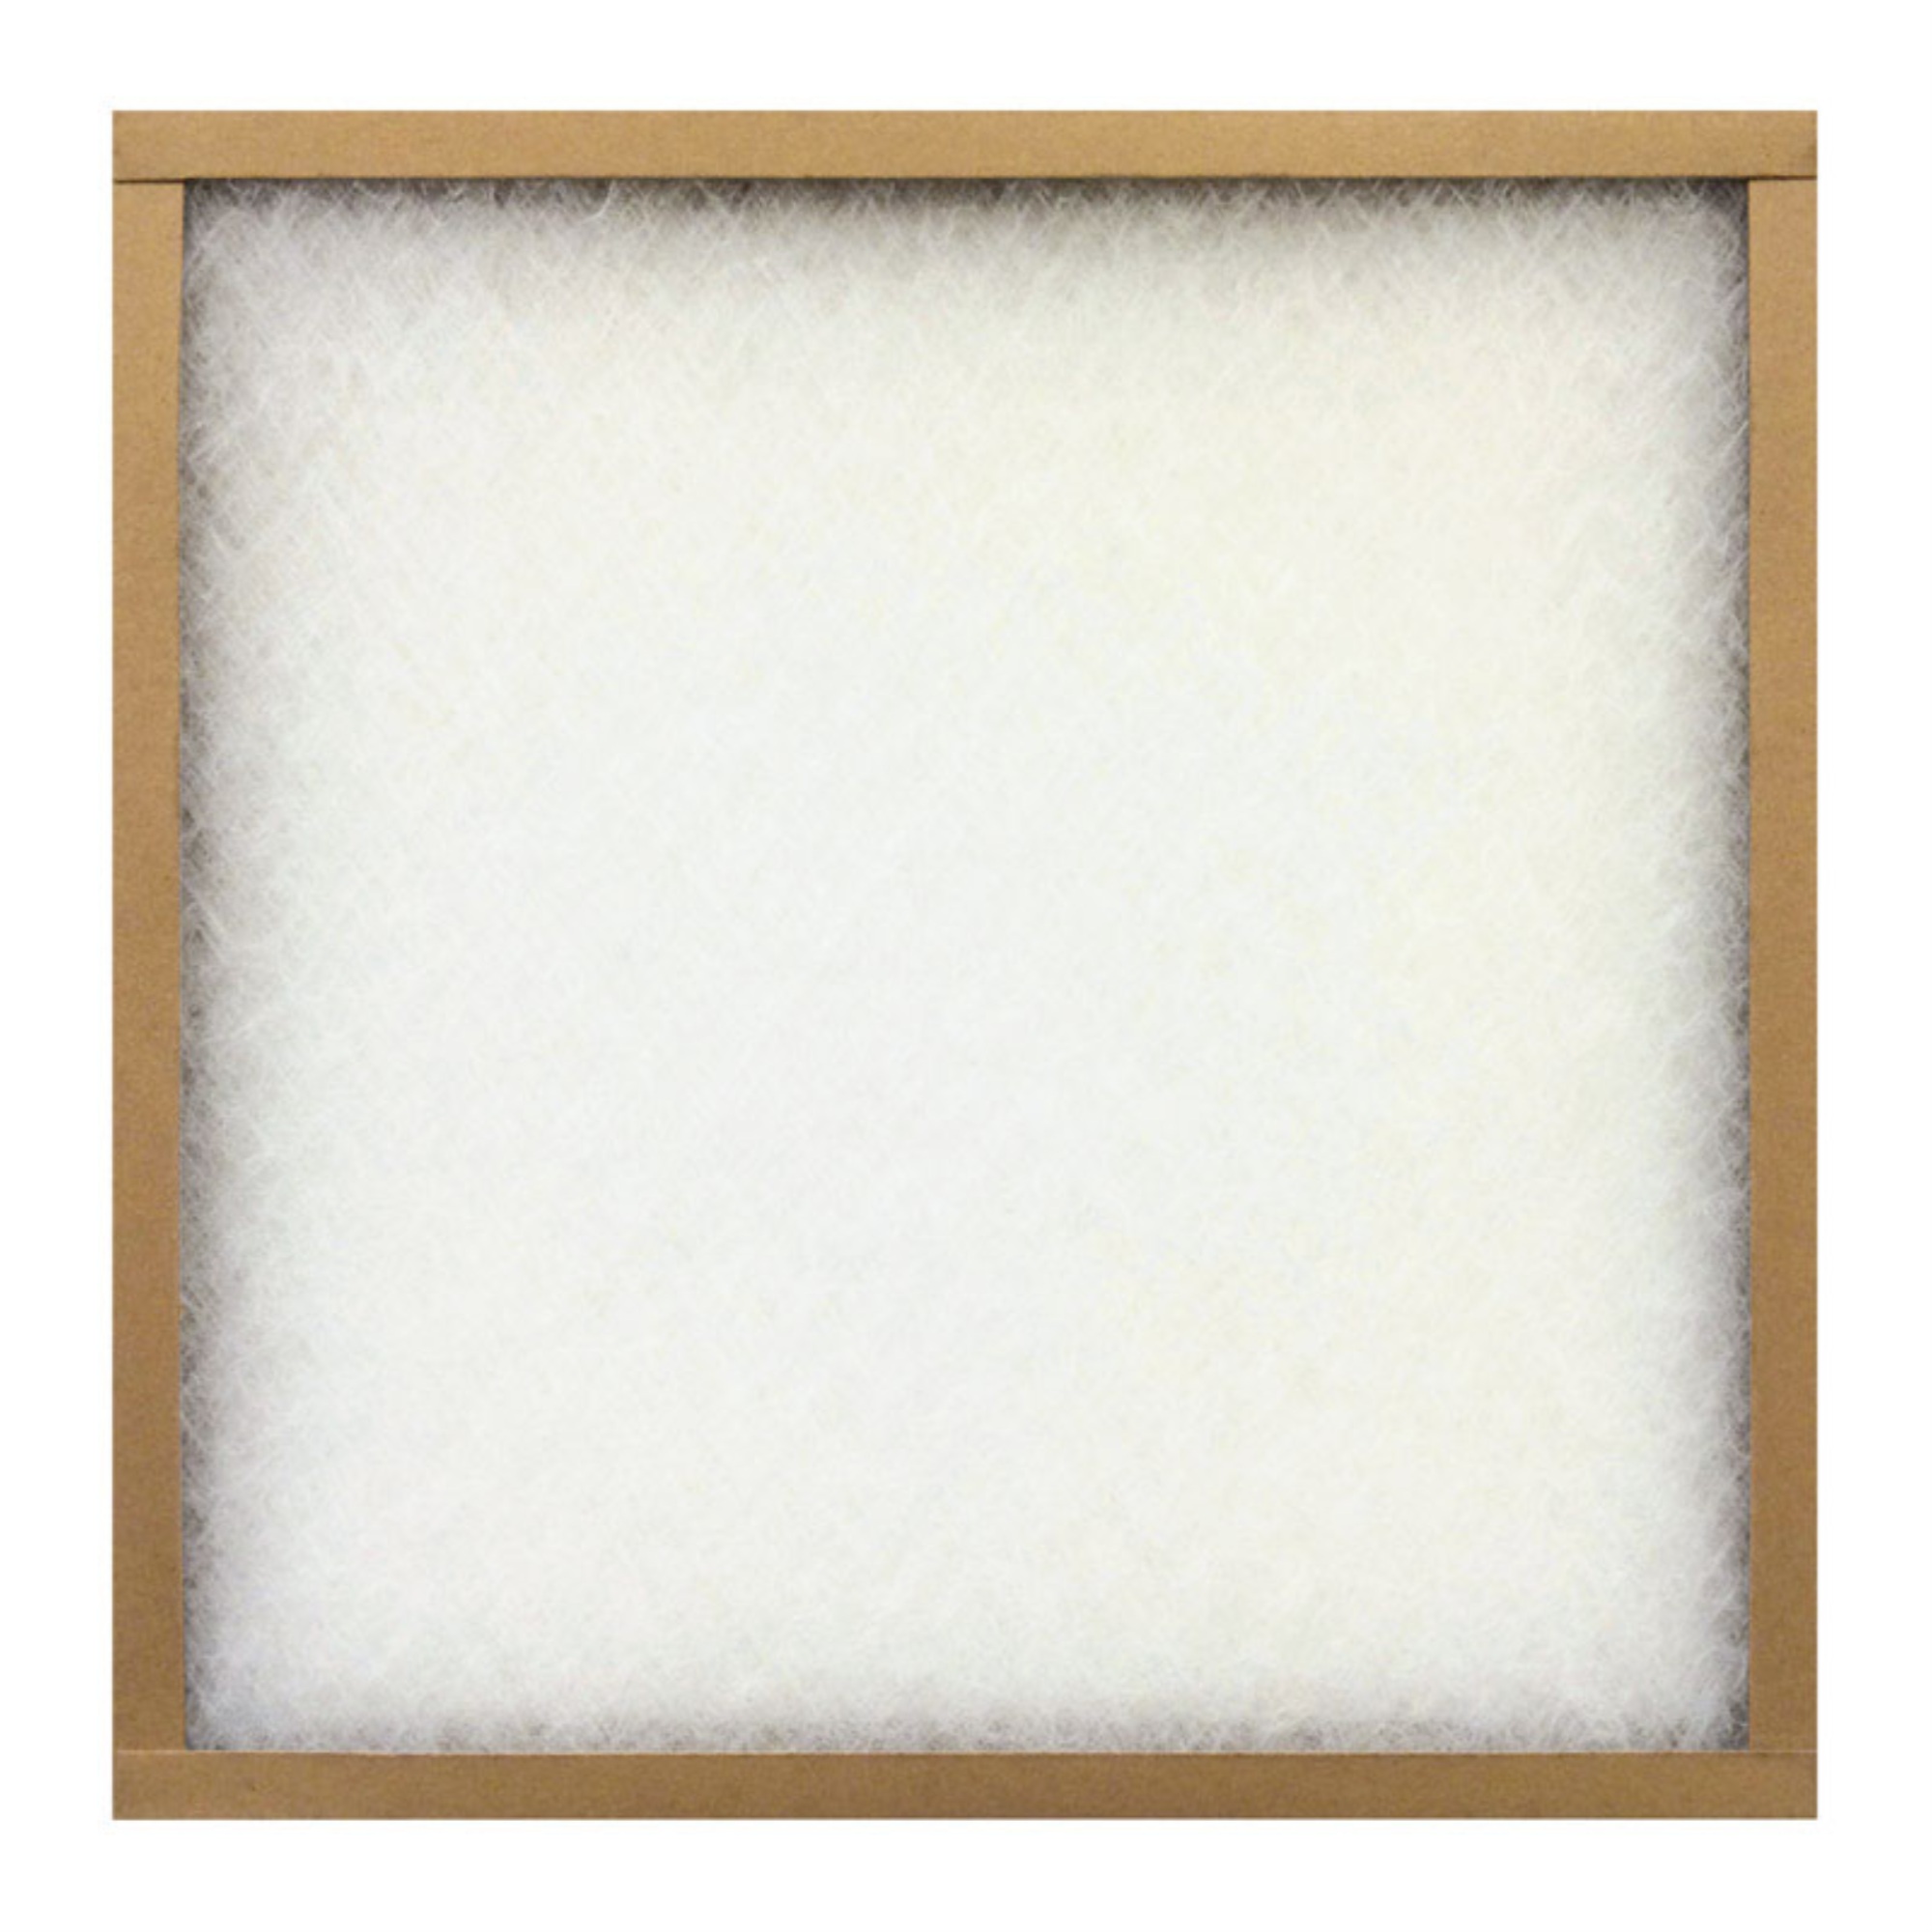 Flanders Corp FILTER FURN GLS 14X24X1"" (Pack of 12)